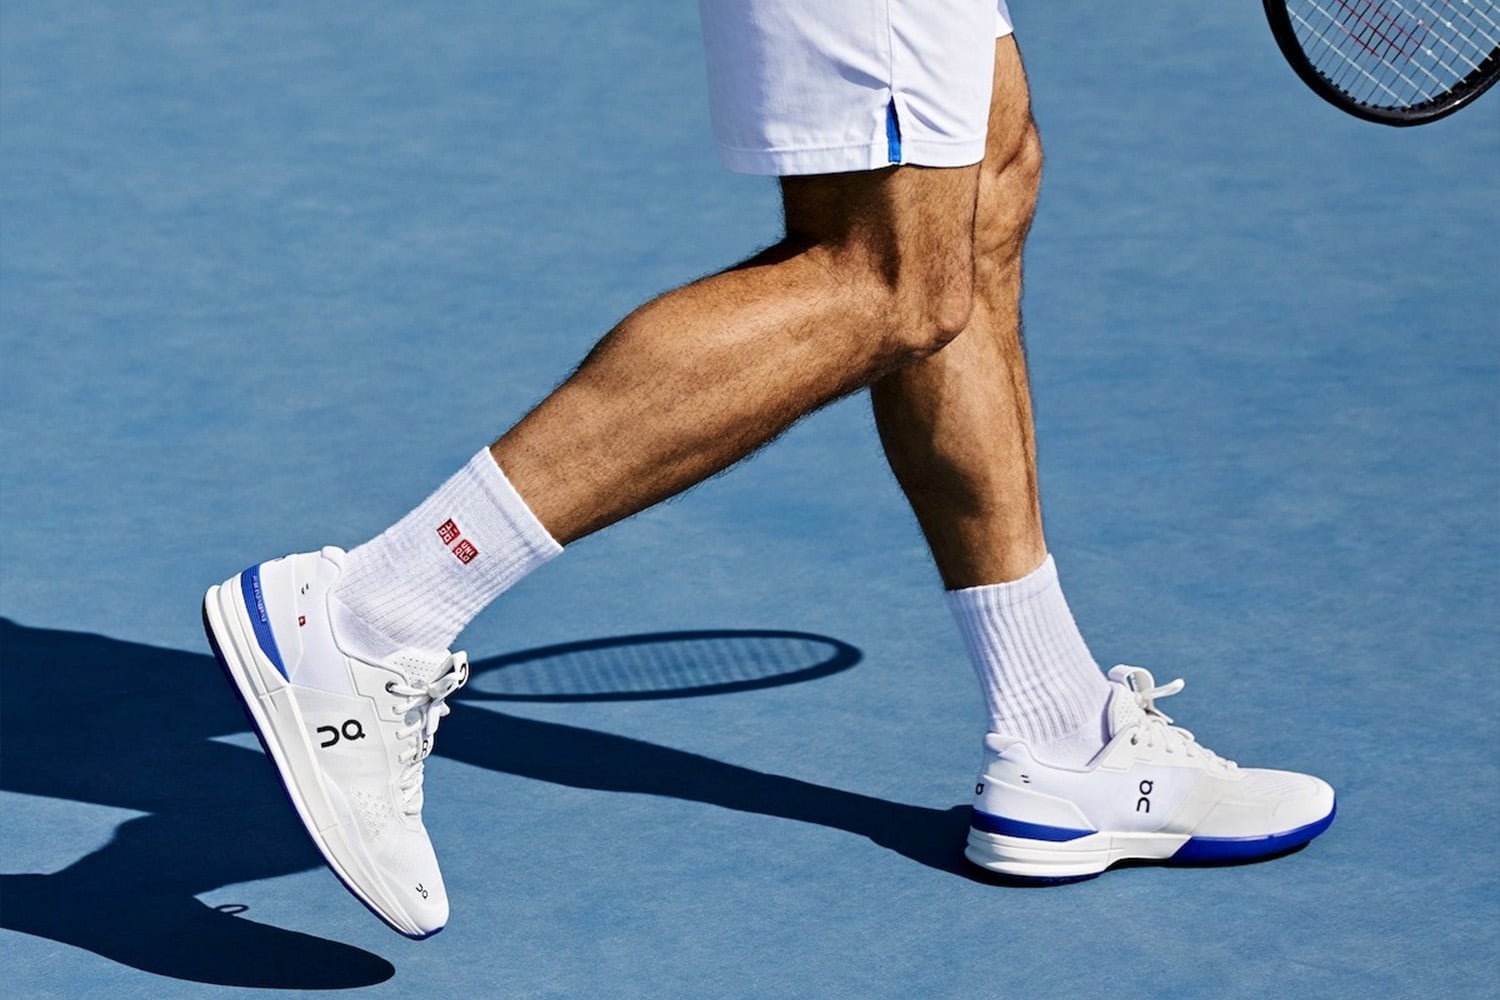 Legs of male tennis player wearing white tennis shoes and Uniqlo socks